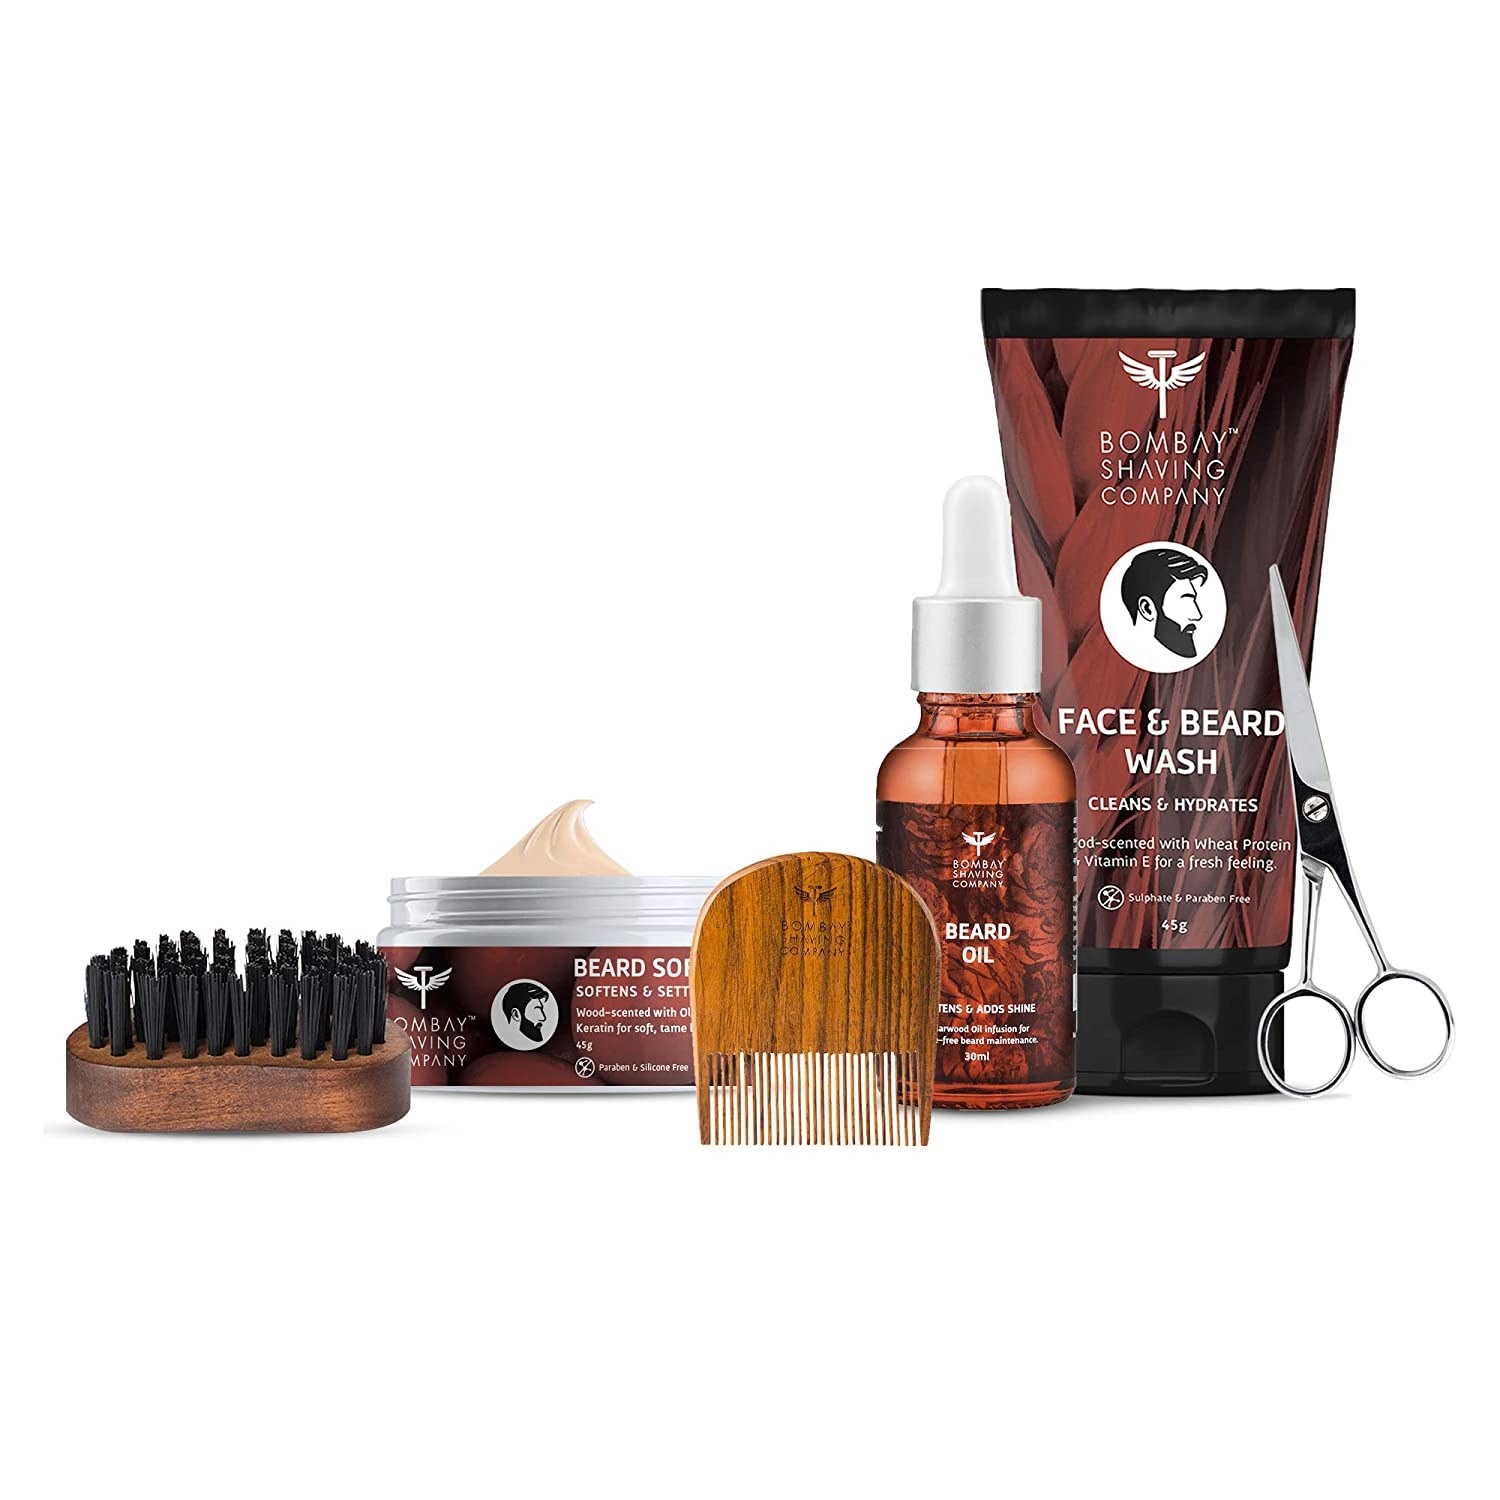 The kit contains a face and beard wash, beard oil, beard softening balm, brush, comb, and scissors.